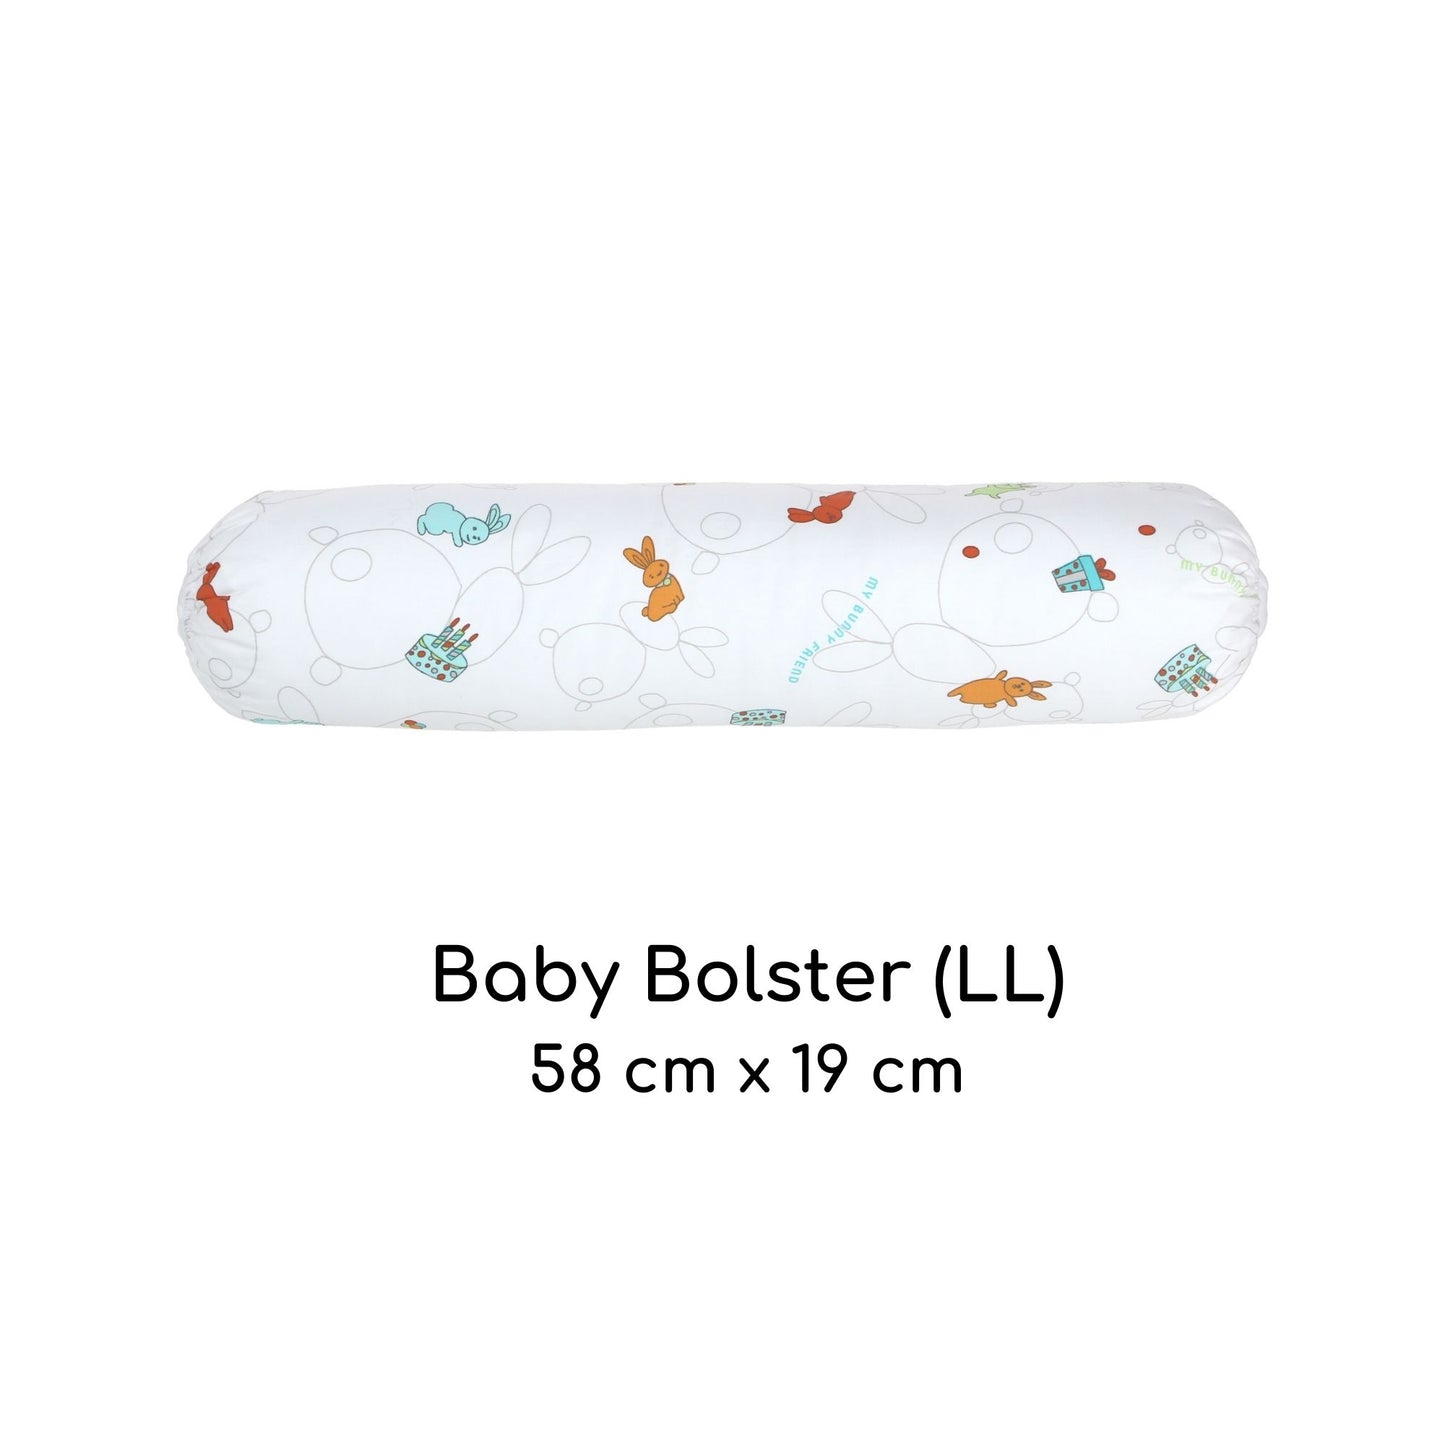 My Bunny Friend Baby Bolster - LL (Bunny Party)